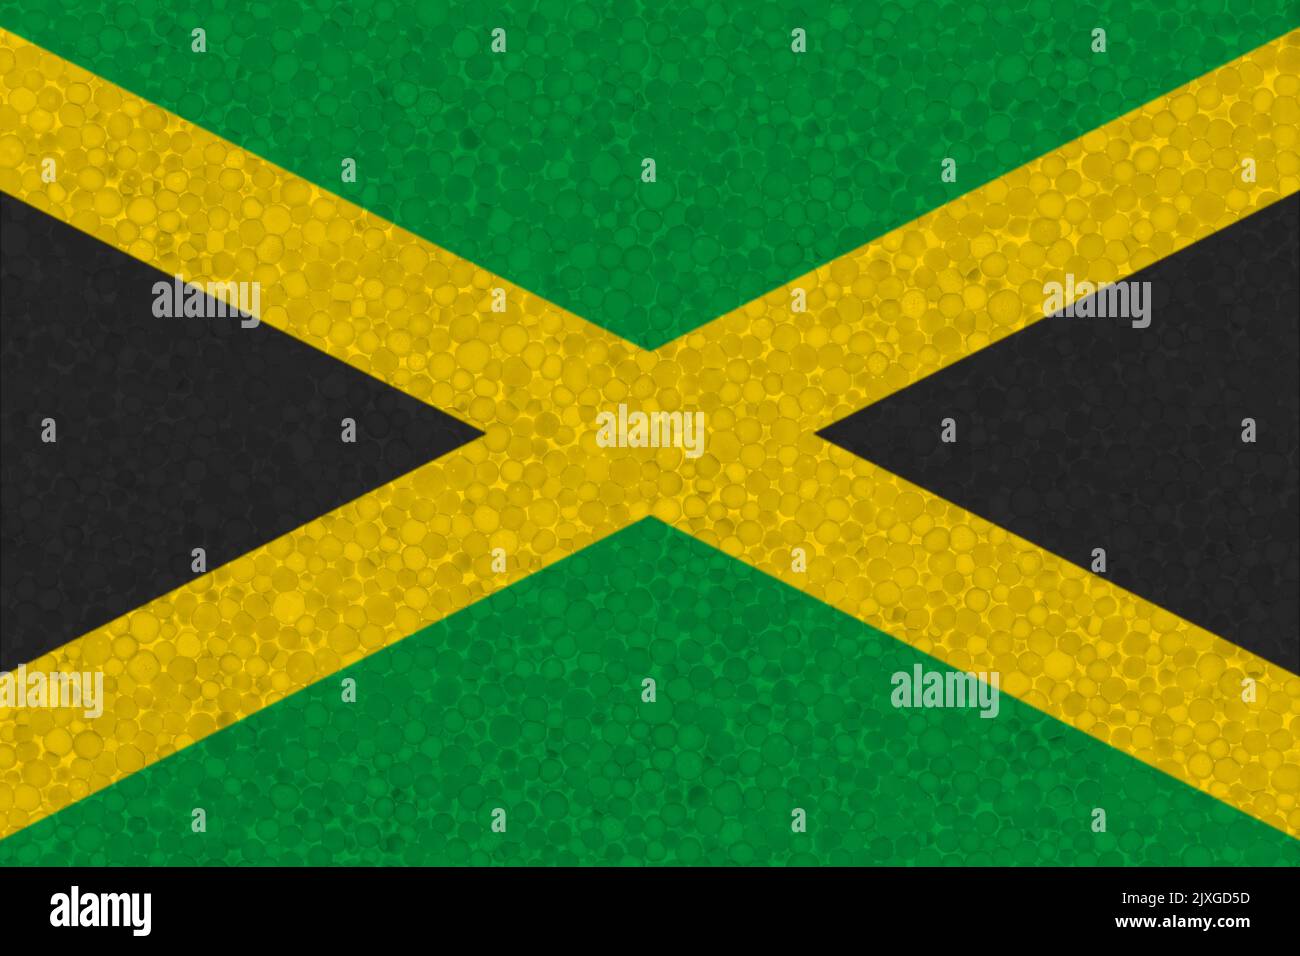 Flag of Jamaica on styrofoam texture. national flag painted on the surface of plastic foam Stock Photo